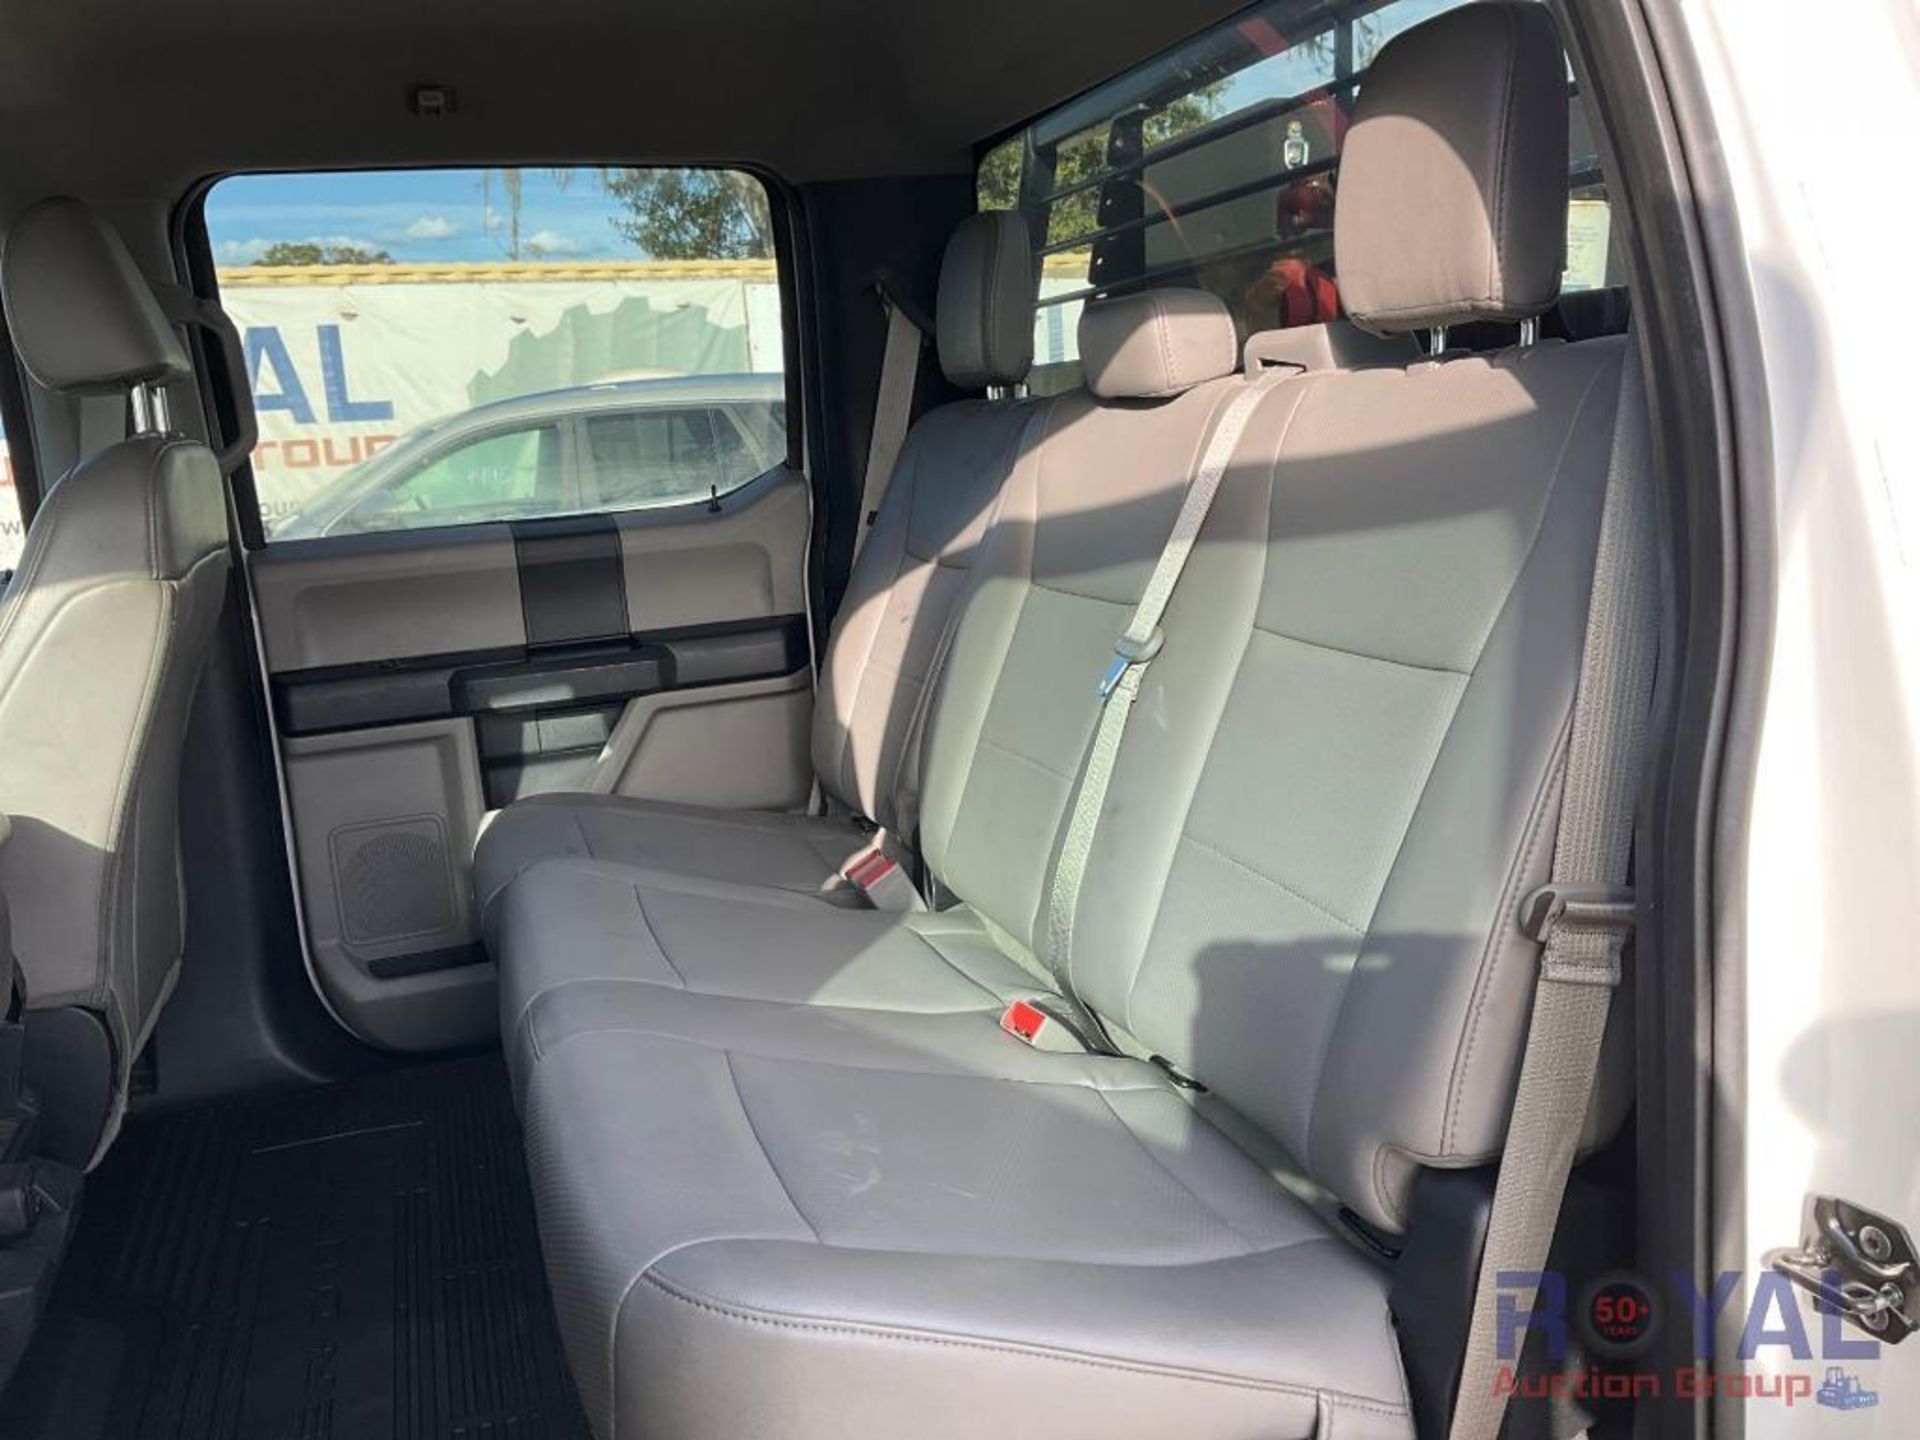 2019 F450 4x4 Service Truck - Image 23 of 34